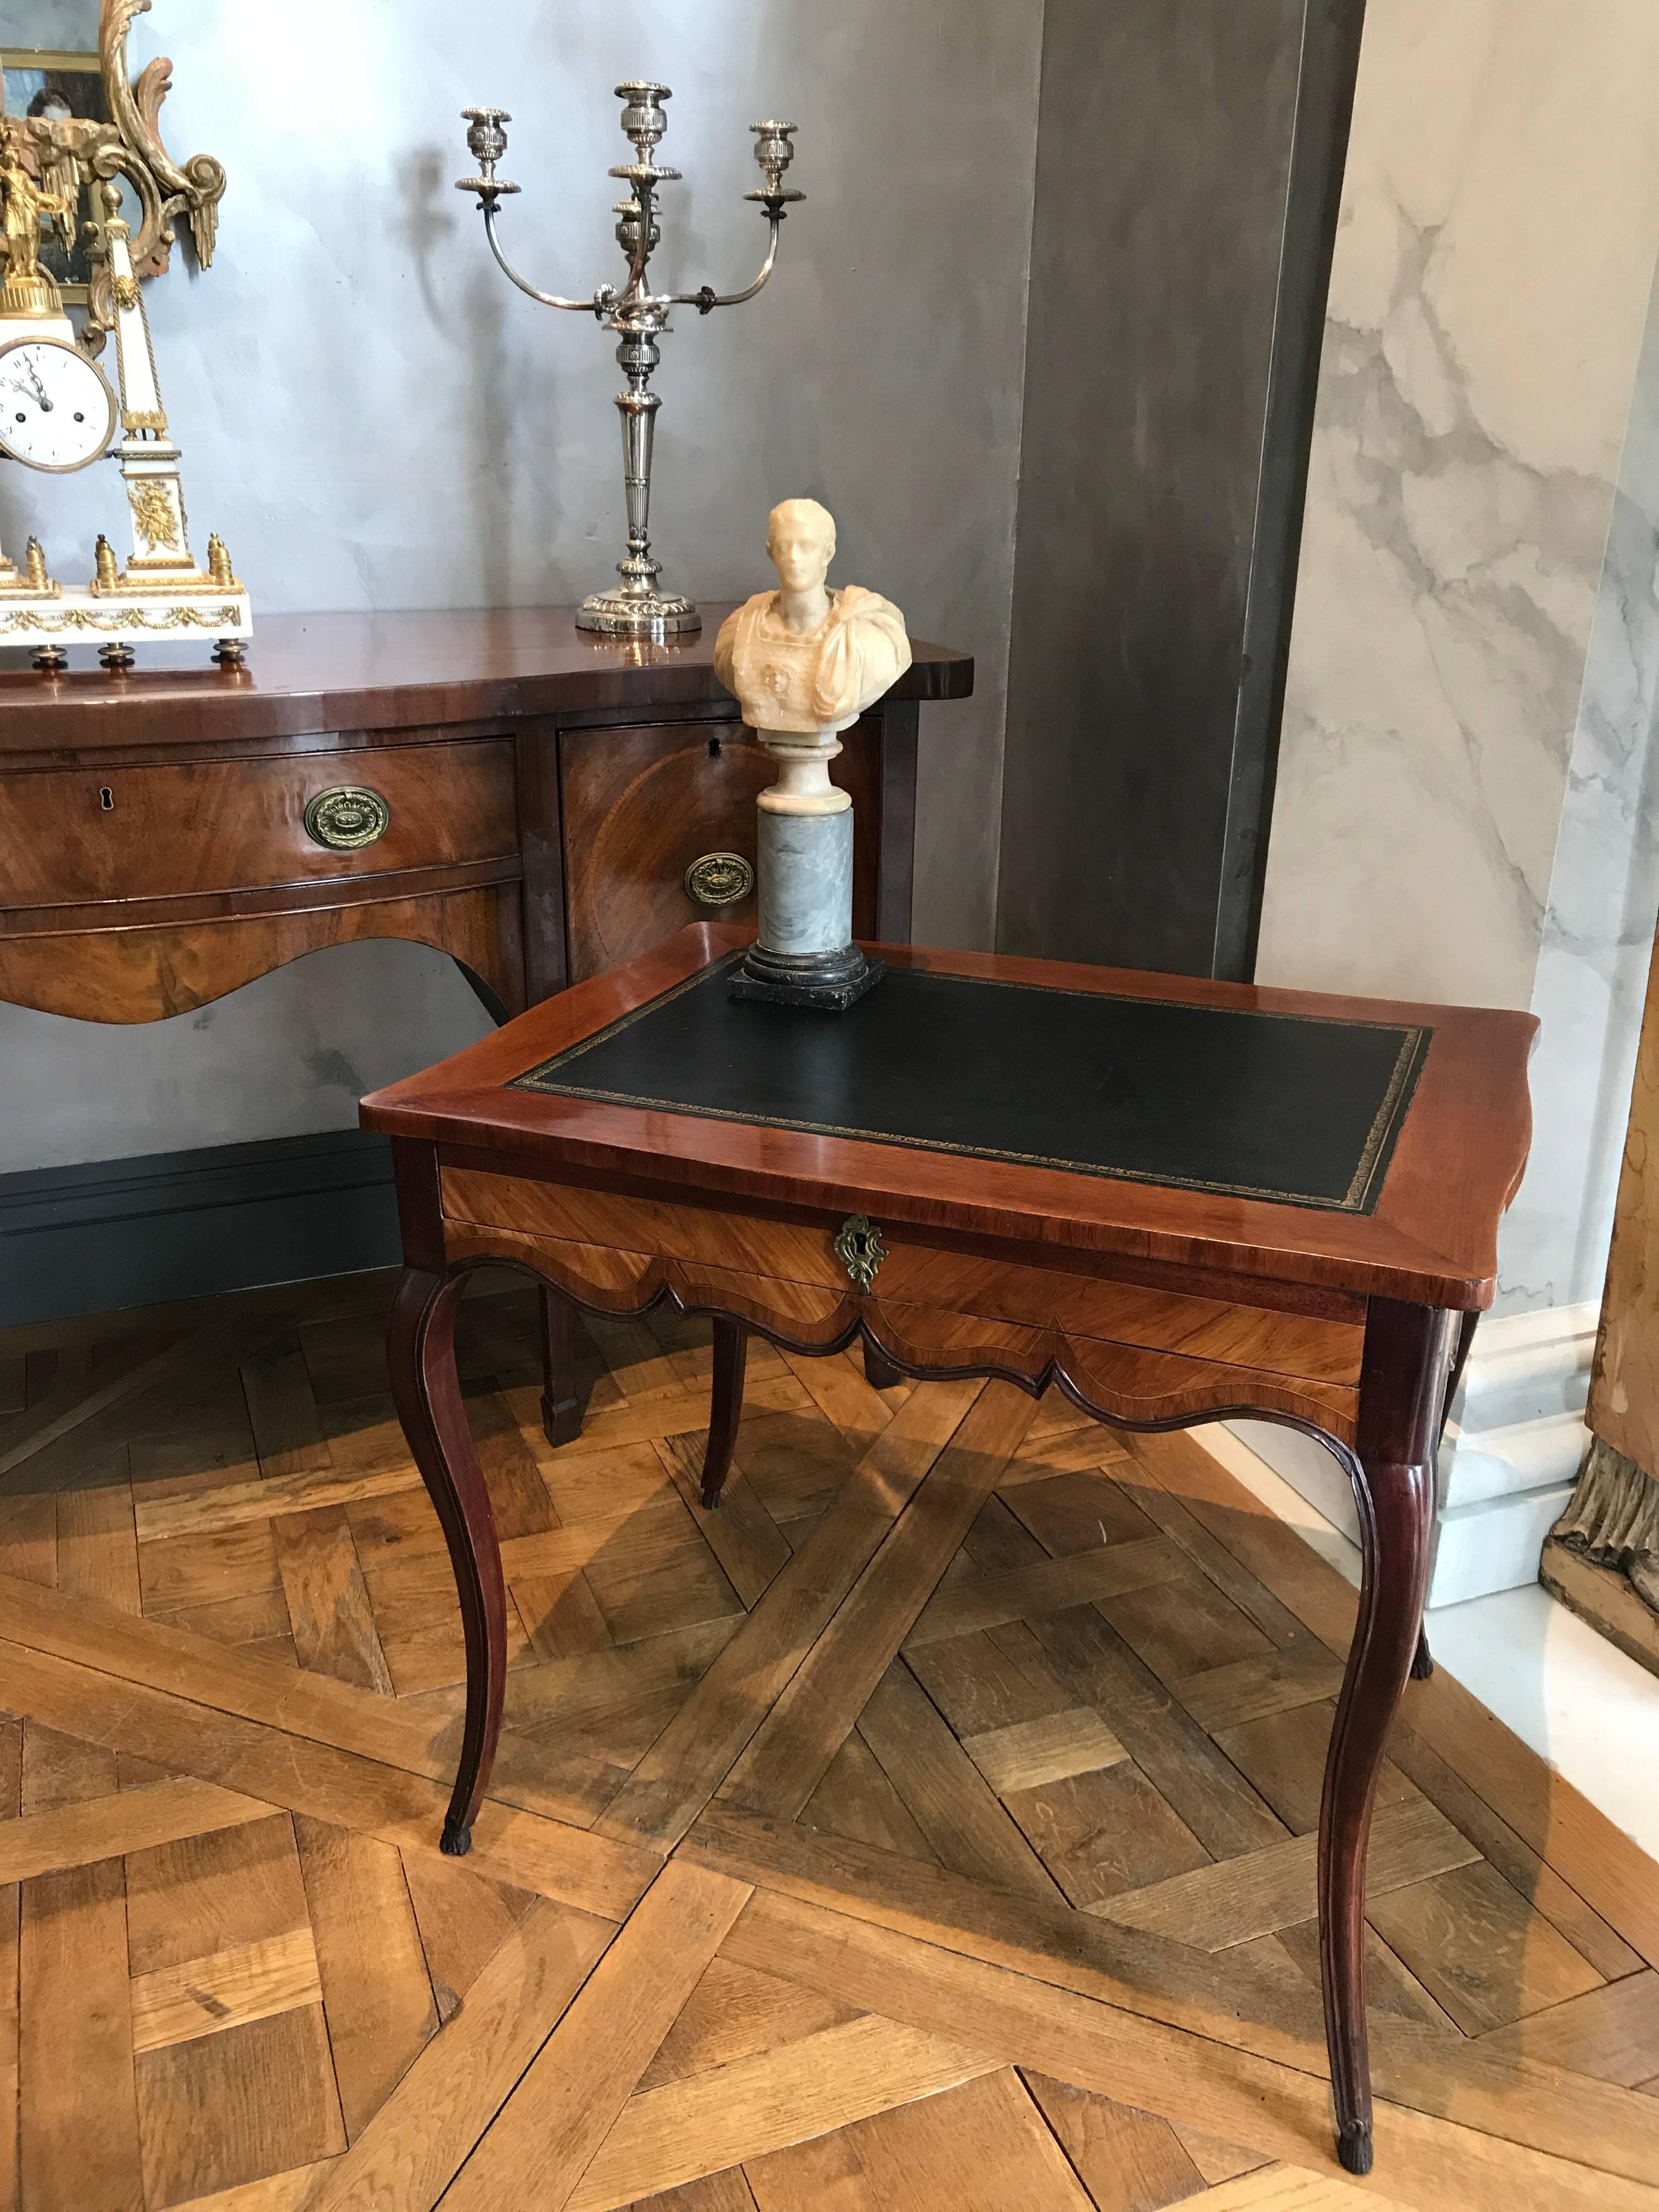 This elegant Gustavian writing table was made in the late 18th century out of kingwood and tulipwood with solid mahogany curved legs ending in hove feet. The apron is scalloped and has a single large drawer in the front. The black tooled leather top